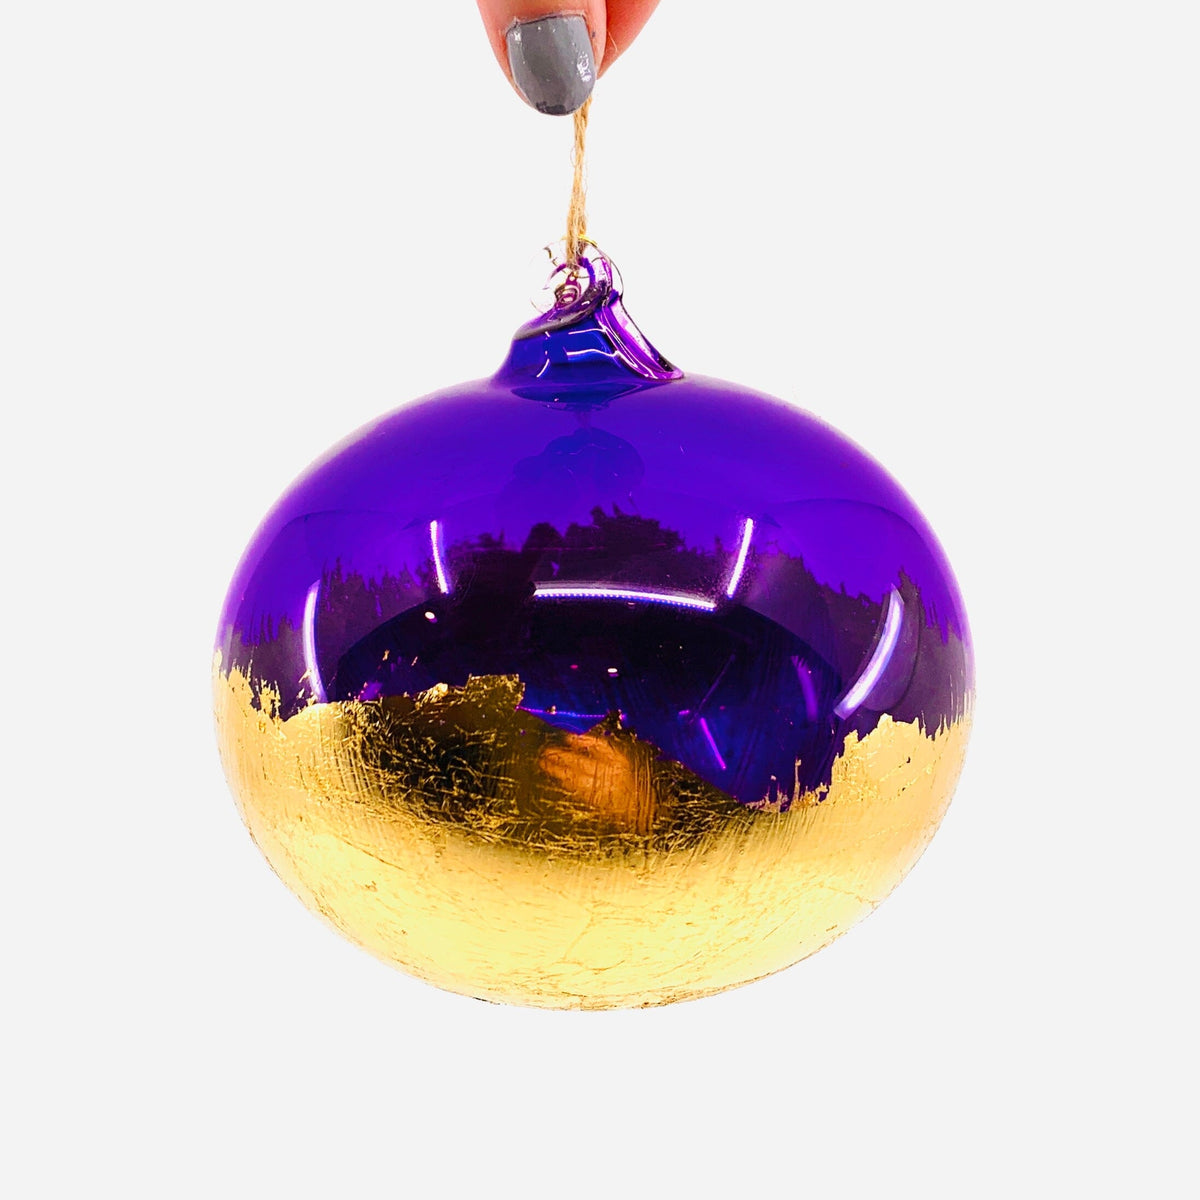 Rainbow Gold Dipped Orb Ornament One Hundred 80 Degrees D 